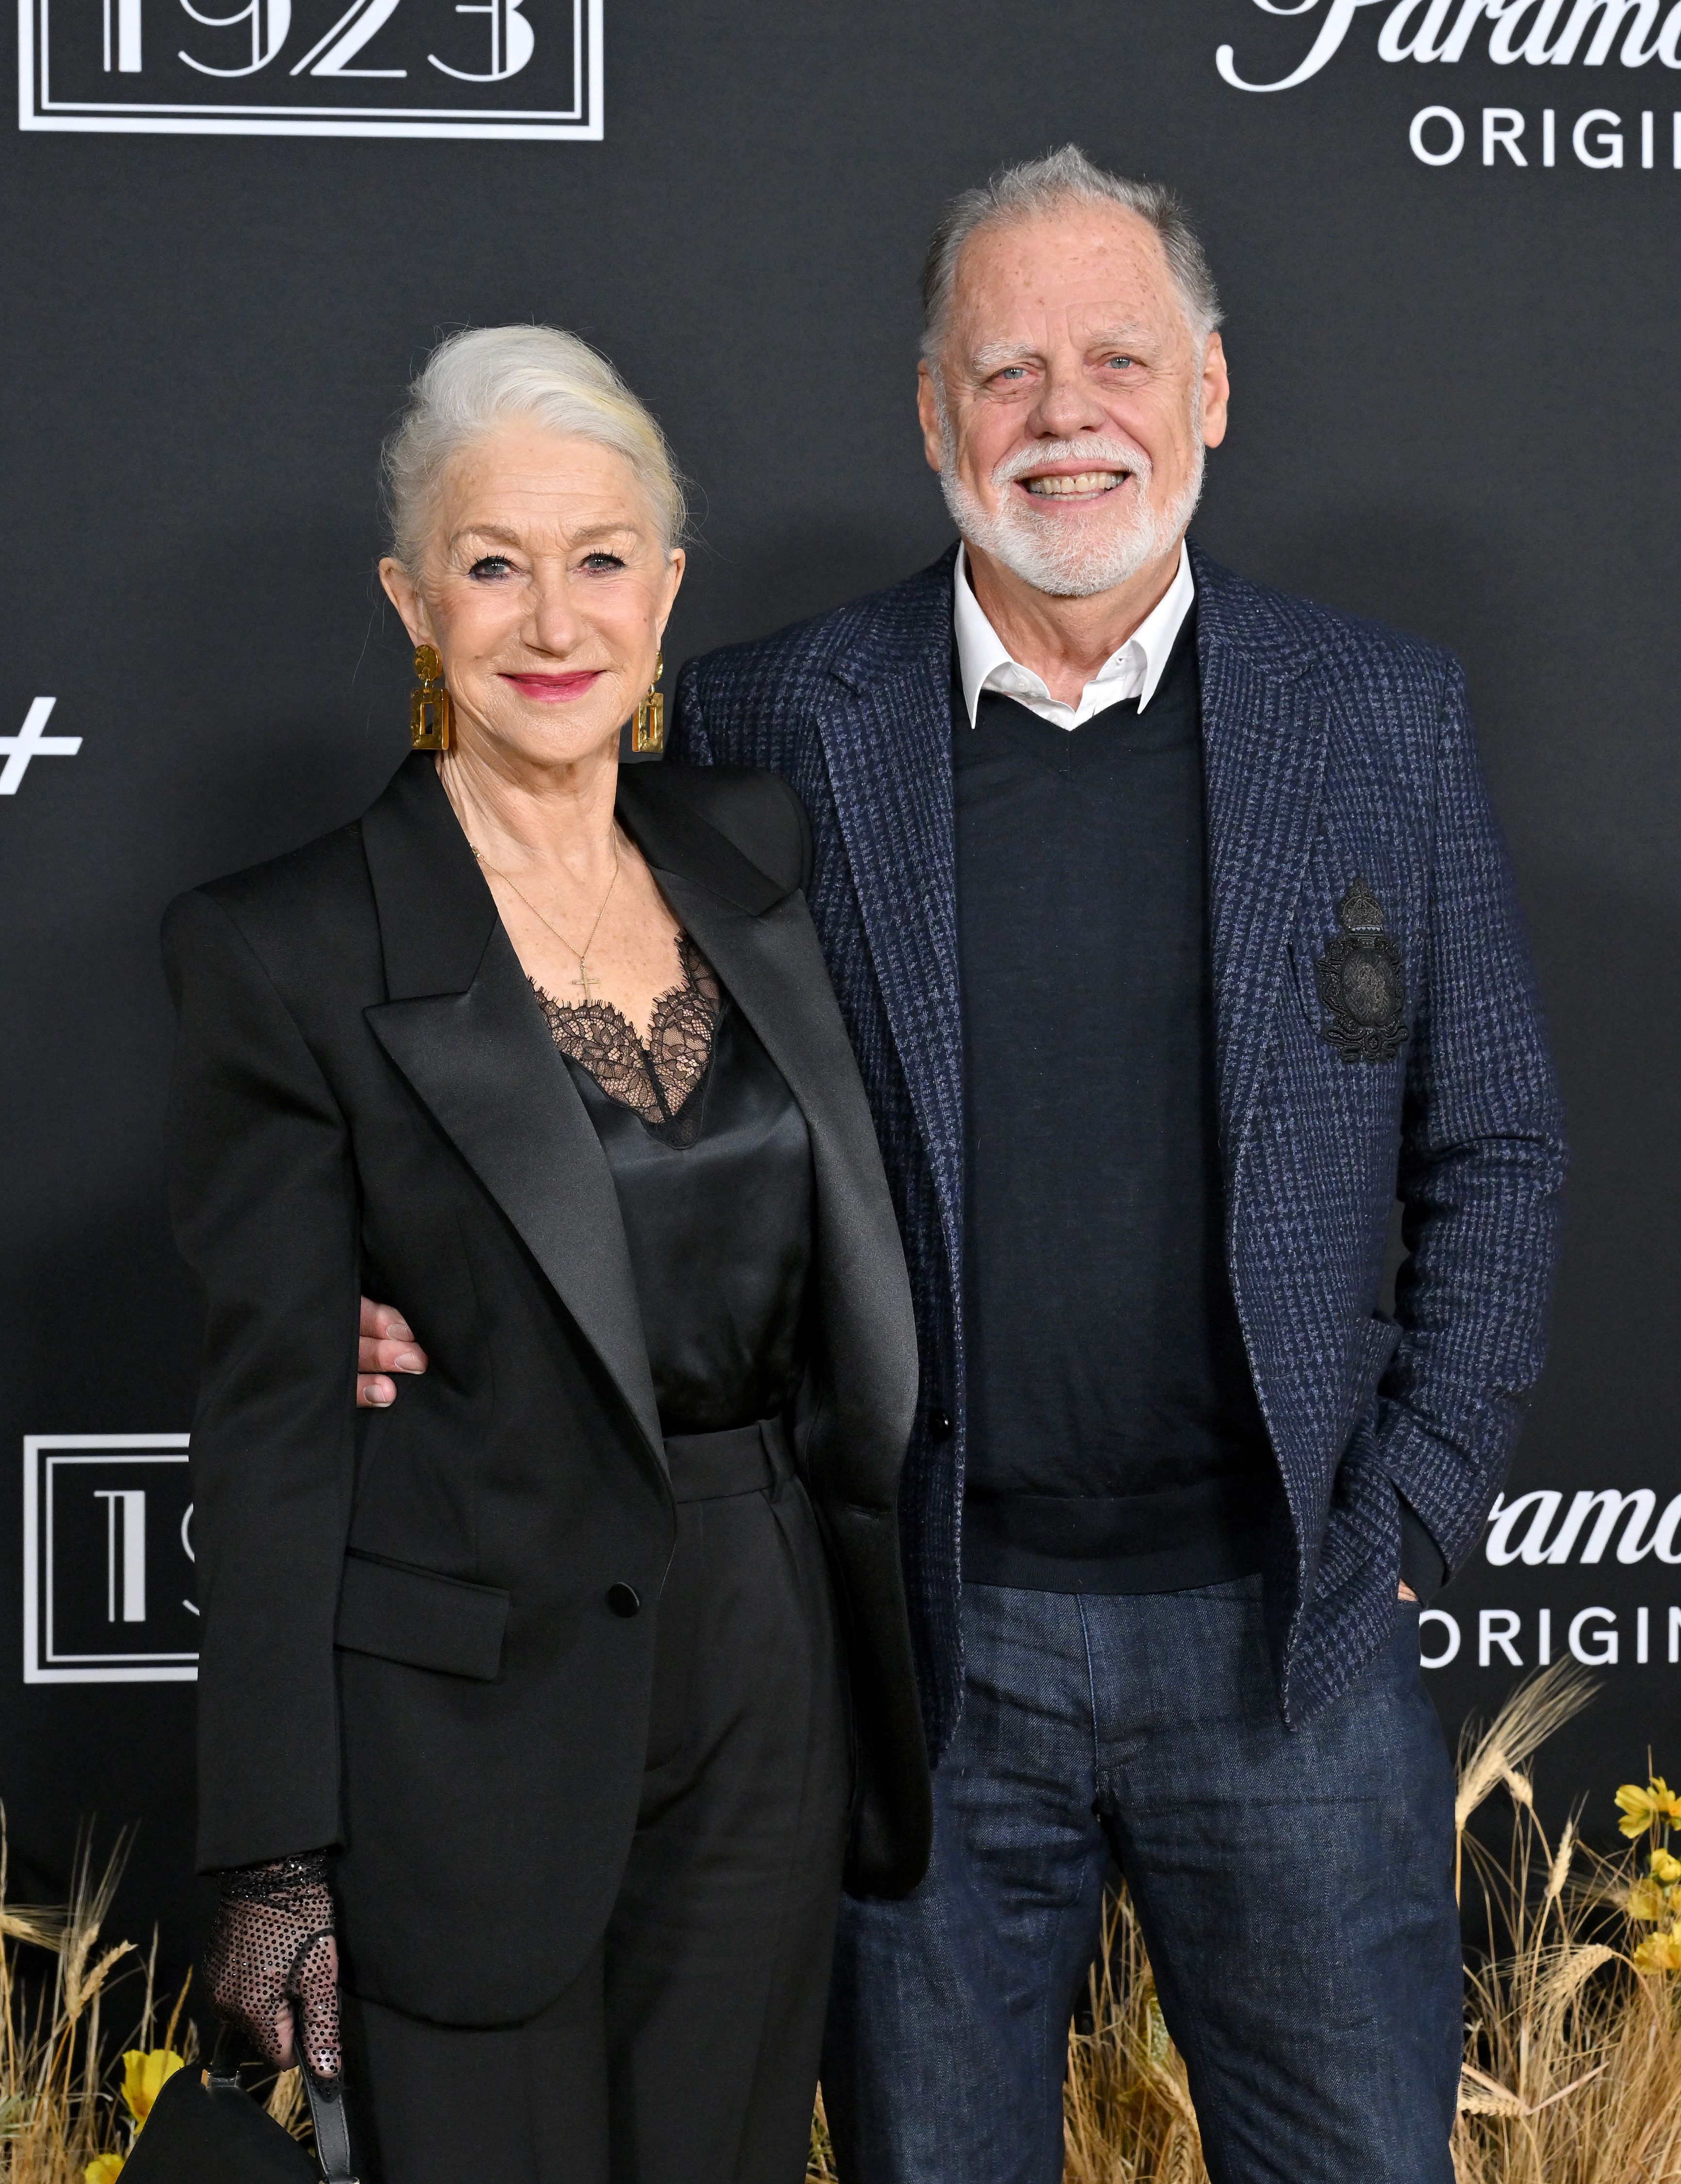 Helen Mirren and Taylor Hackford attend the Los Angeles premiere of Paramount+'s "1923" at Hollywood American Legion, on December 2, 2022, in Los Angeles, California. | Source: Getty Images